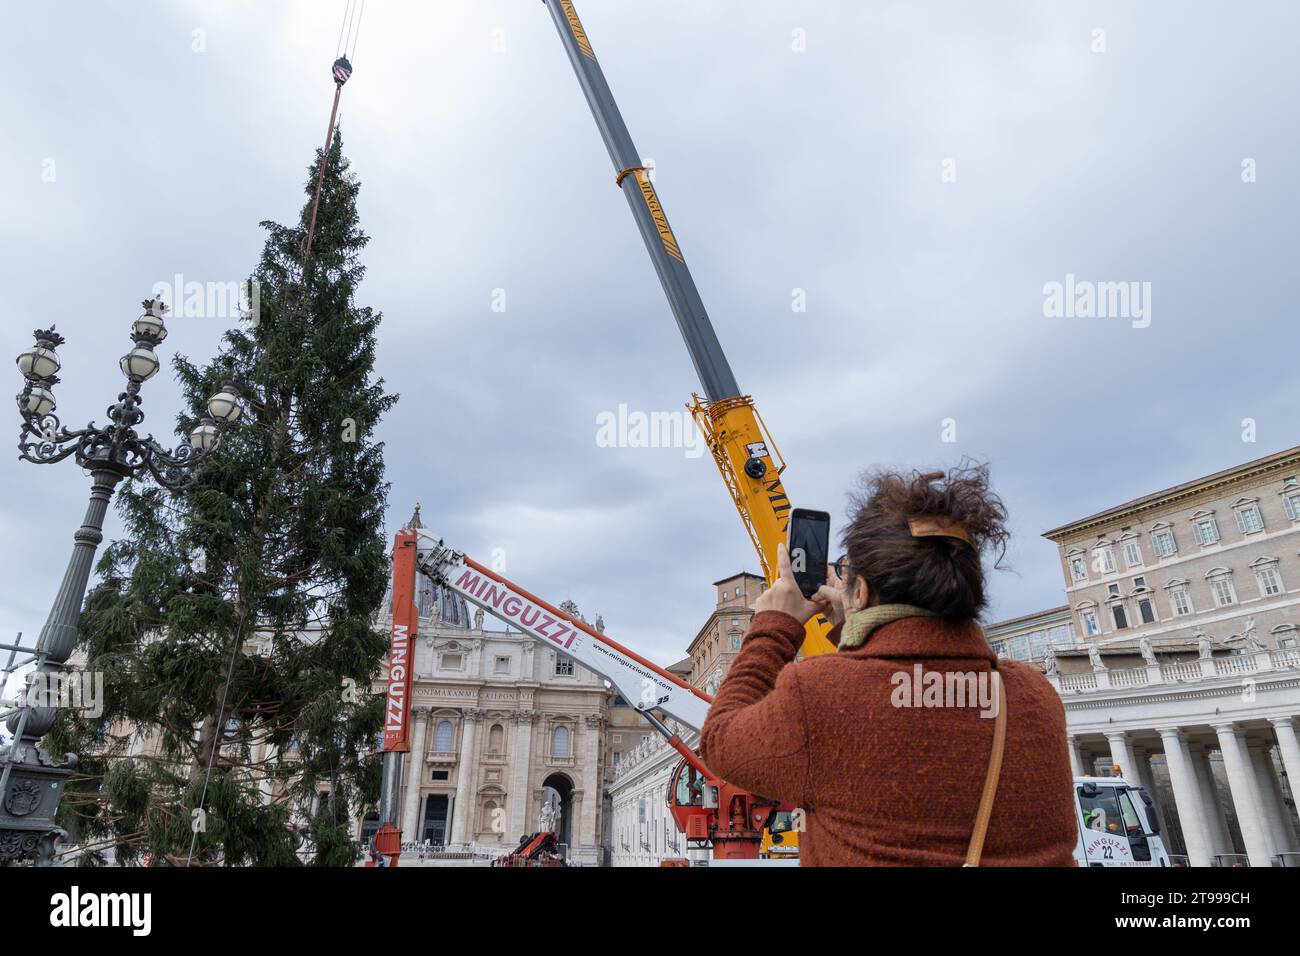 Rome, Italy. 23rd Nov, 2023. View of the installation of the Christmas tree in St. Peter's Square. The Christmas tree arrived in St. Peter's Square with 27 meters high, it weighs 6.5 tons and was donated by the municipality of Macra, in the woods of Cuneo. It will be decorated with lights and over 7,000 dried edelweiss which will give the effect of a snowfall. The lights will be turned on next December 9. (Photo by Matteo Nardone/Pacific Press) Credit: Pacific Press Media Production Corp./Alamy Live News Stock Photo